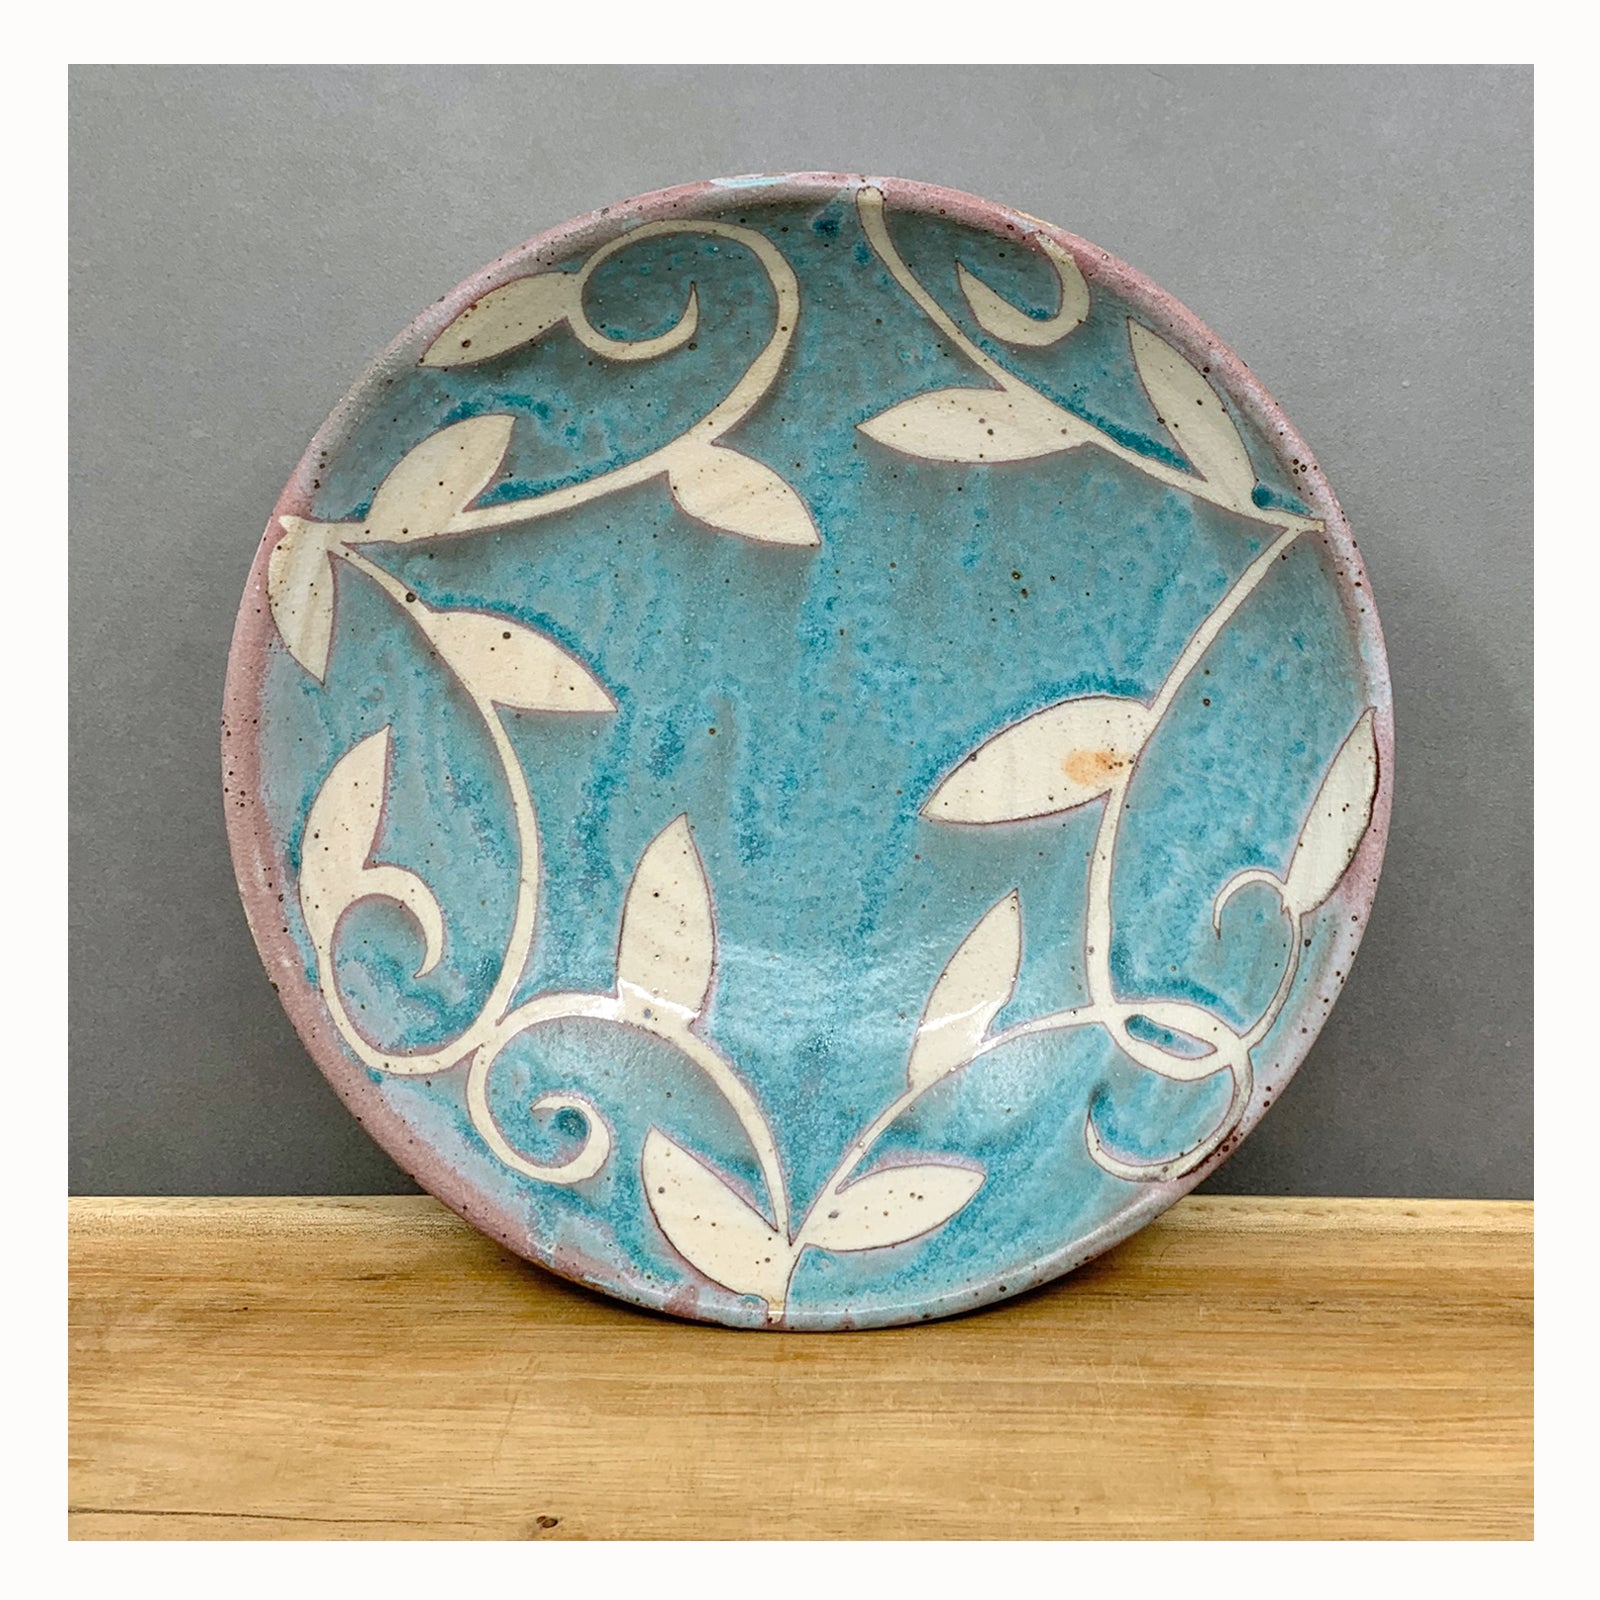 Julie Covington handmade ceramics at Lark & Key, Charlotte NC. Shop online or locally by appointment. NC pottery.